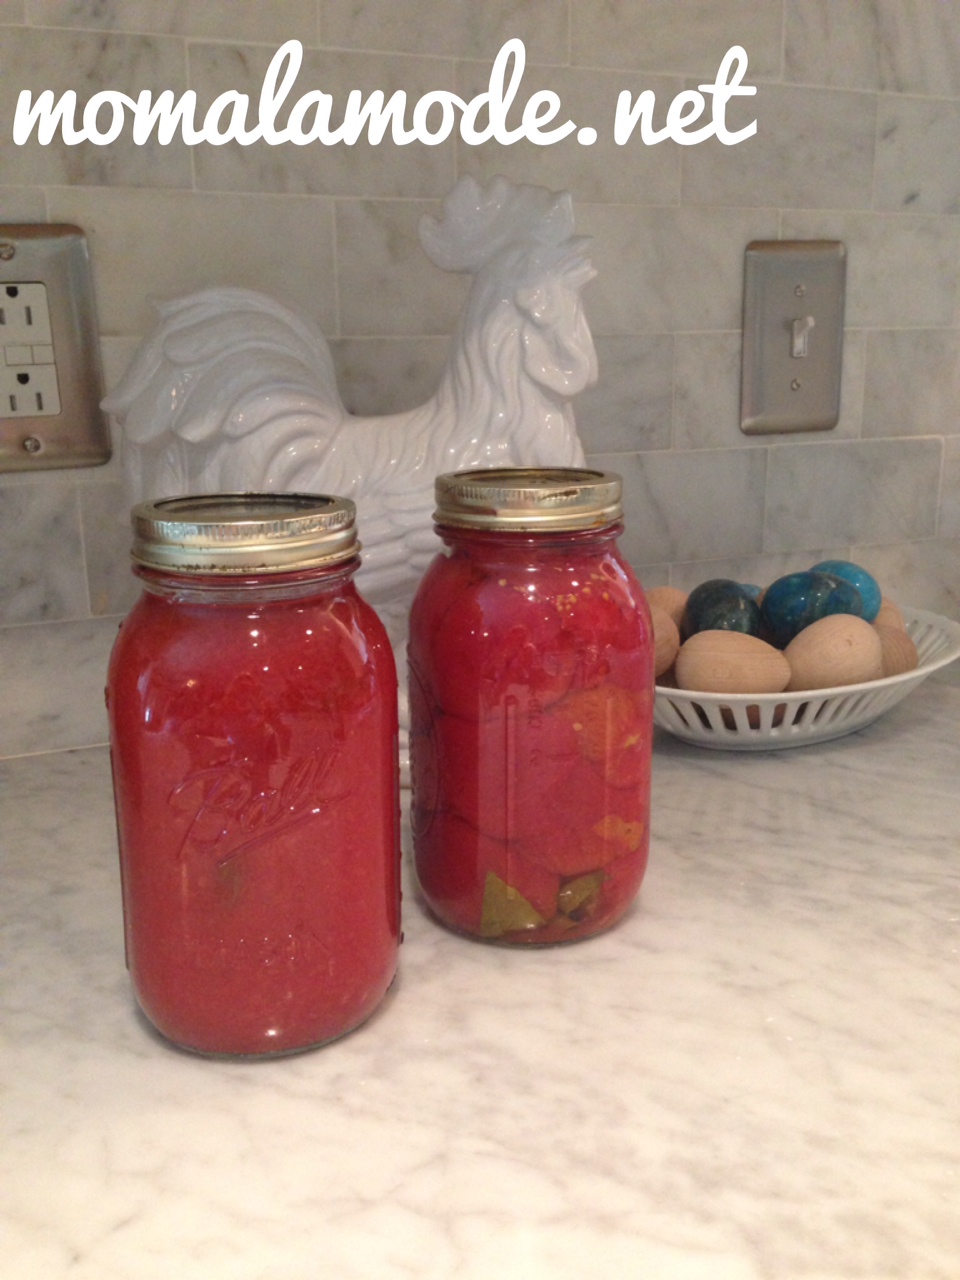 Preserved tomatoes